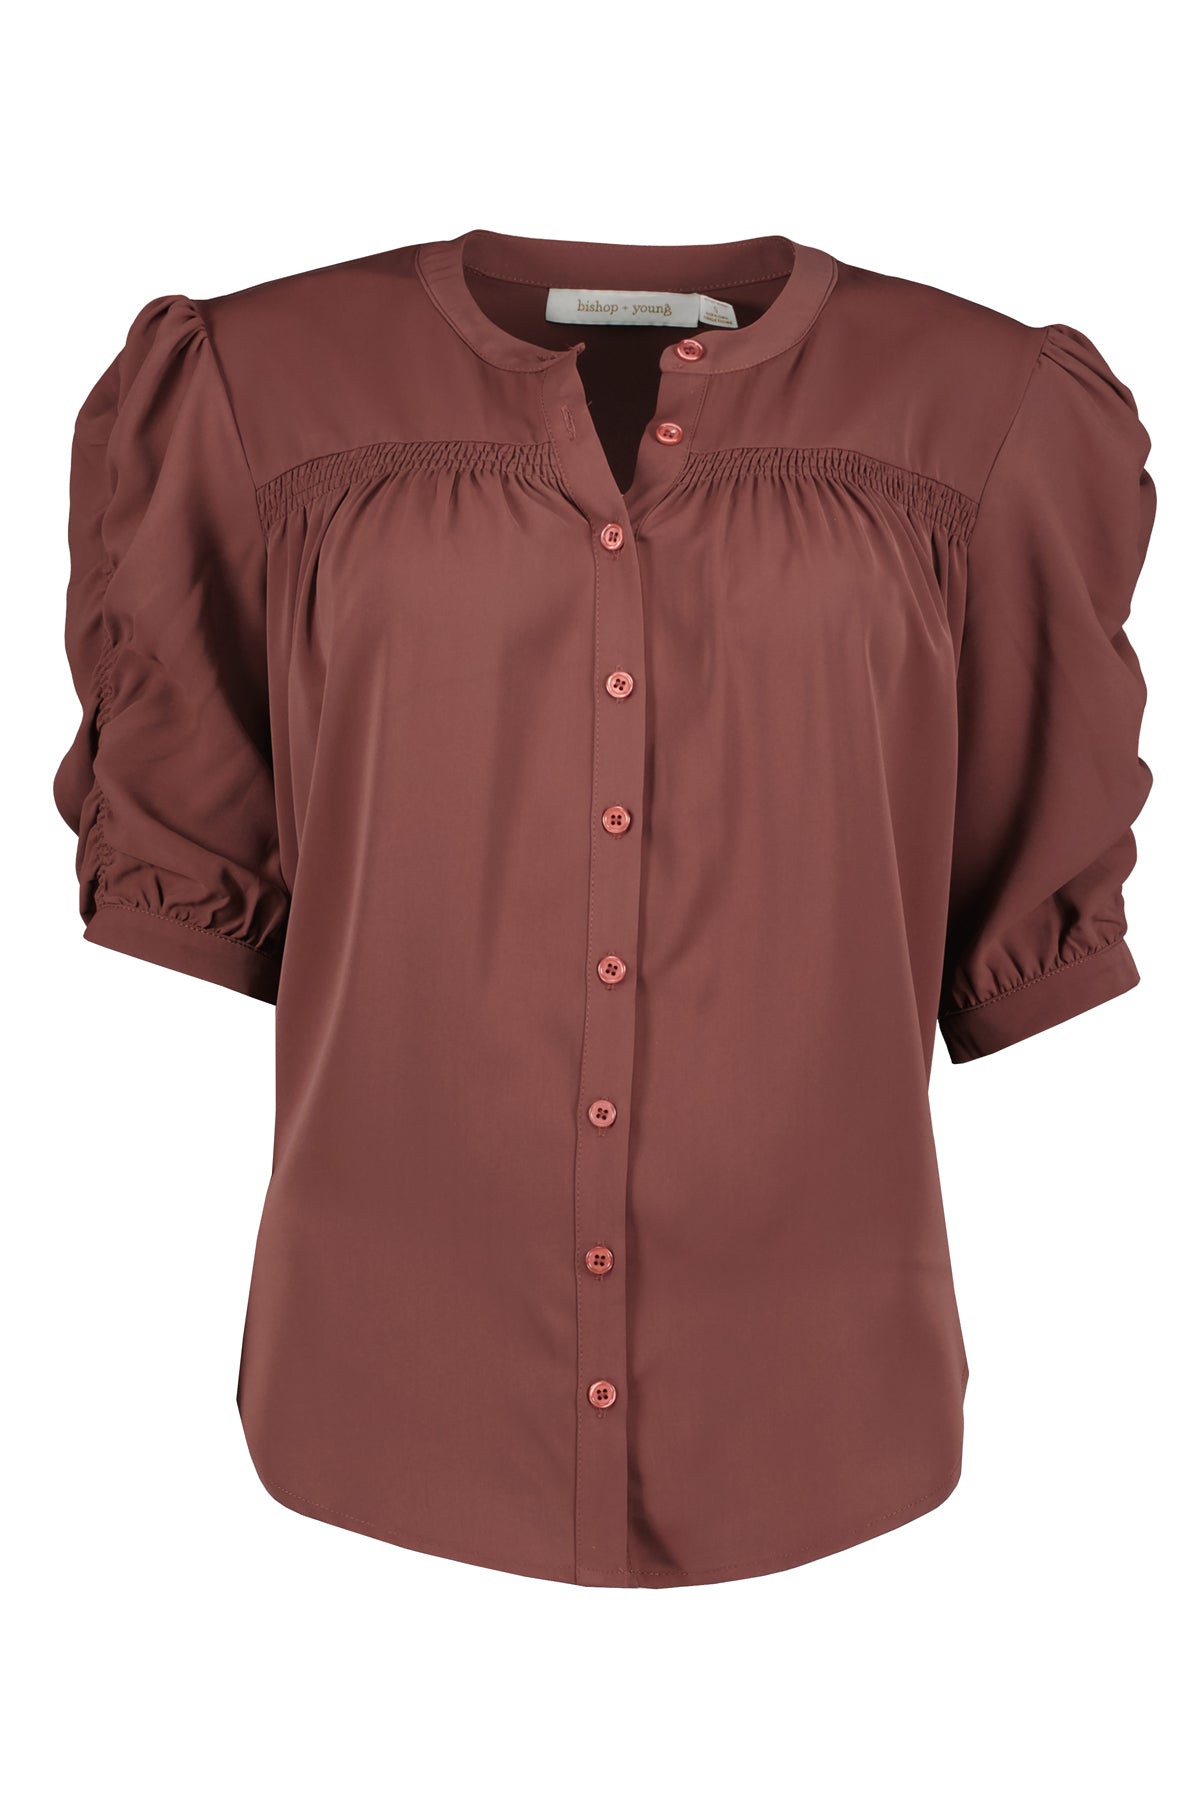 Ruched sleeve and band collar blouse by Bishop and Young  - Tru Blue Boutique